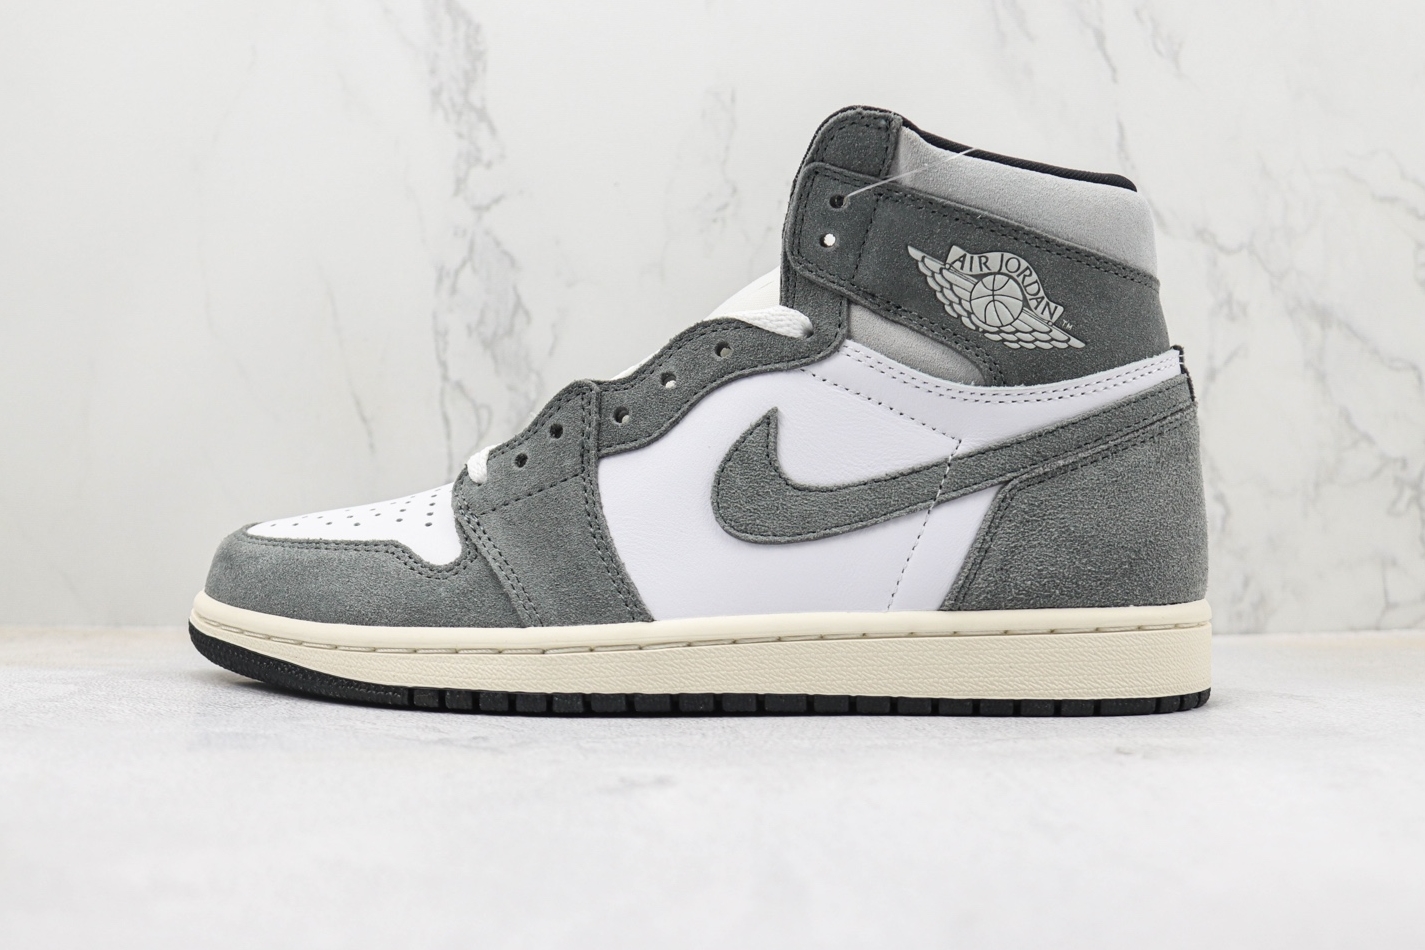 Air Jordan 1 Retro High OG 'Washed Heritage' DZ5485-051 - Trendy and Timeless Sneakers